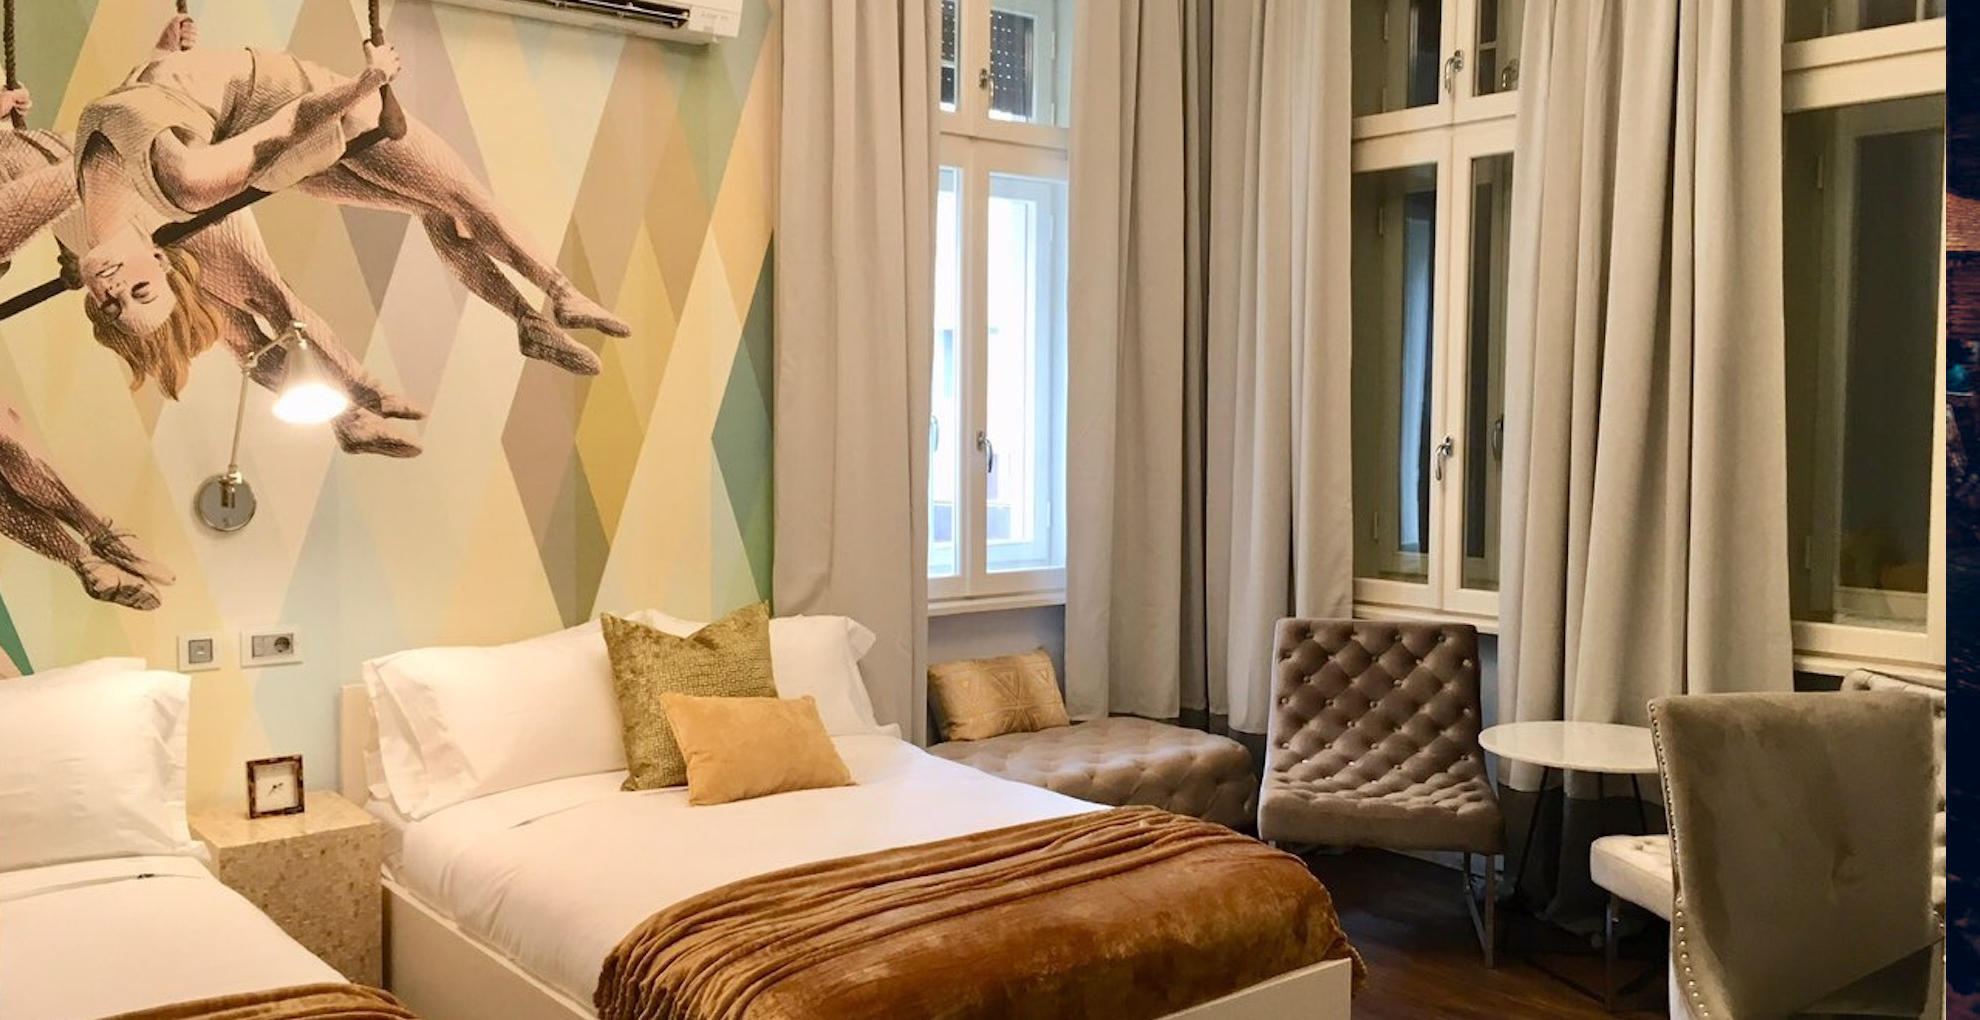 MUSE Hotel Awards 2020 Winner - 29A Guesthouse 